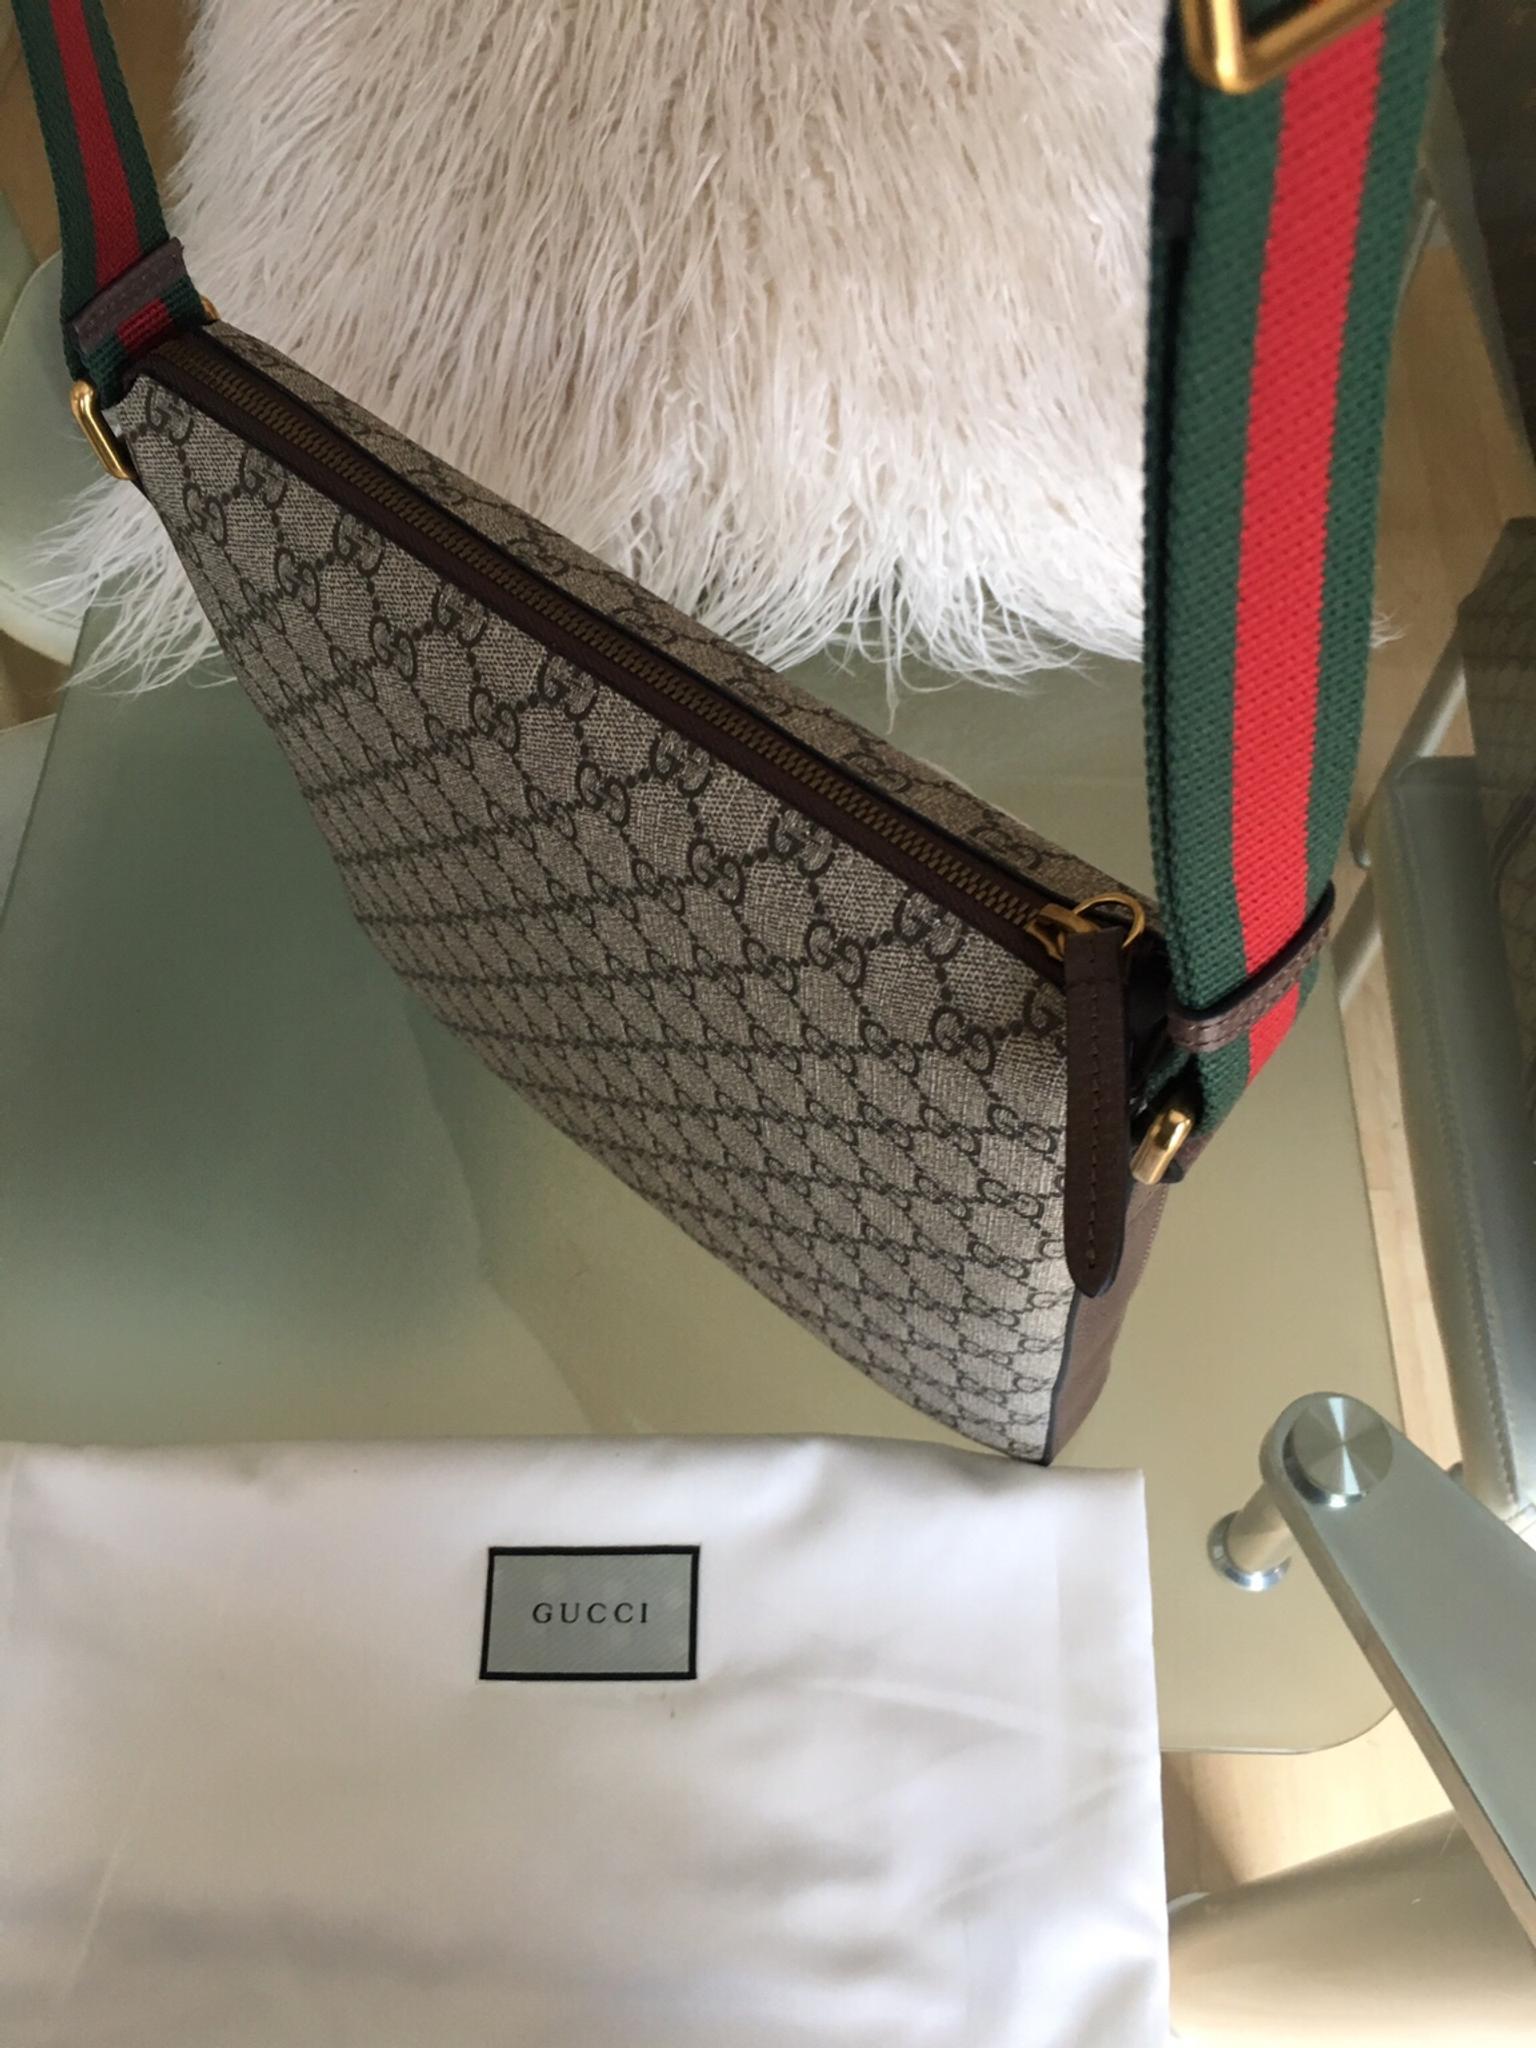 gucci messenger bag with red and green strap